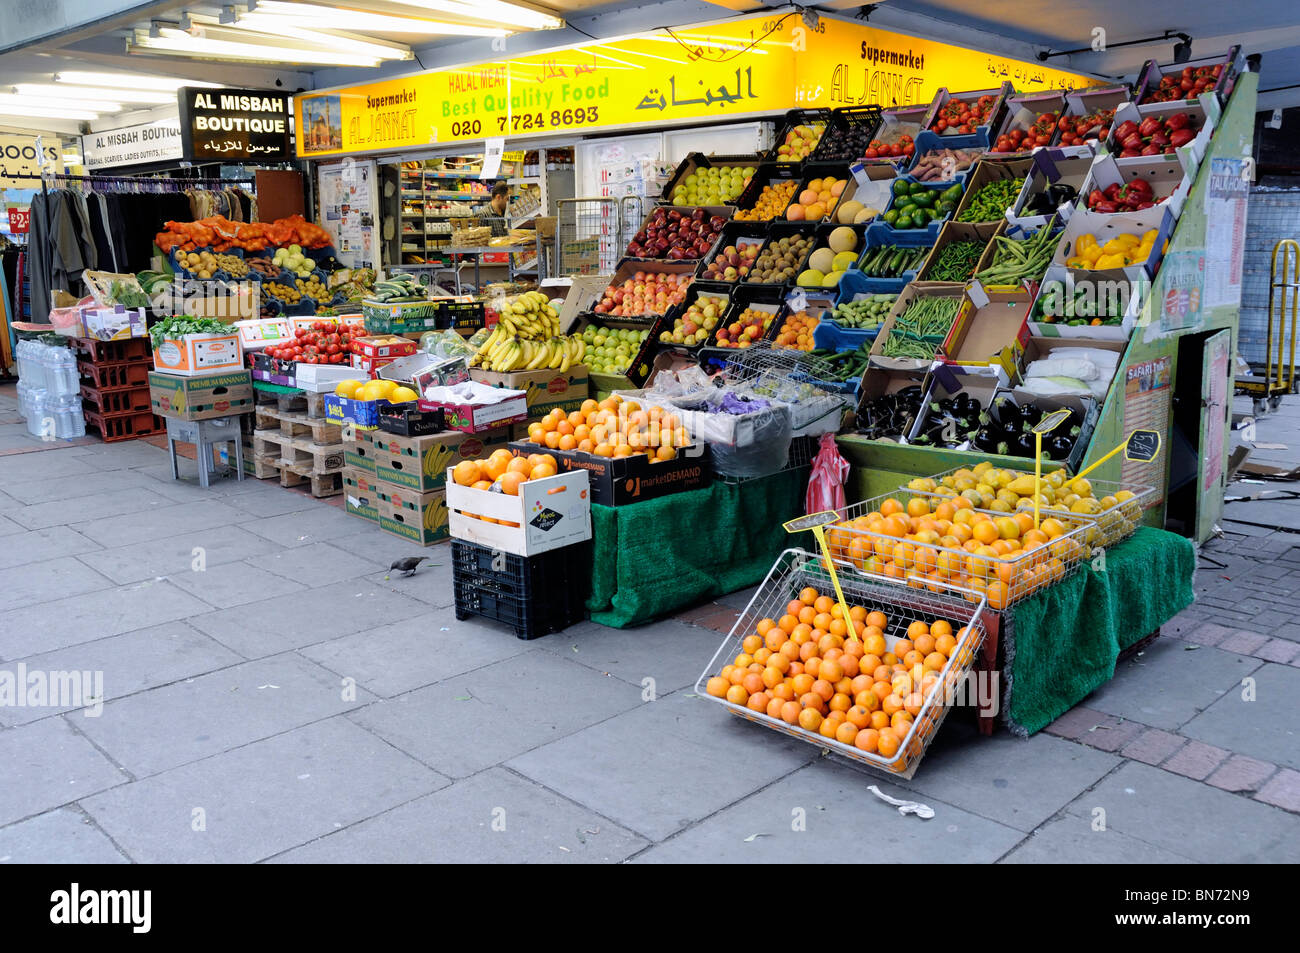 Grocers Shop with fruit and vegetables displayed in street, Edgware Road, London Borough of Westminster, England, UK Stock Photo